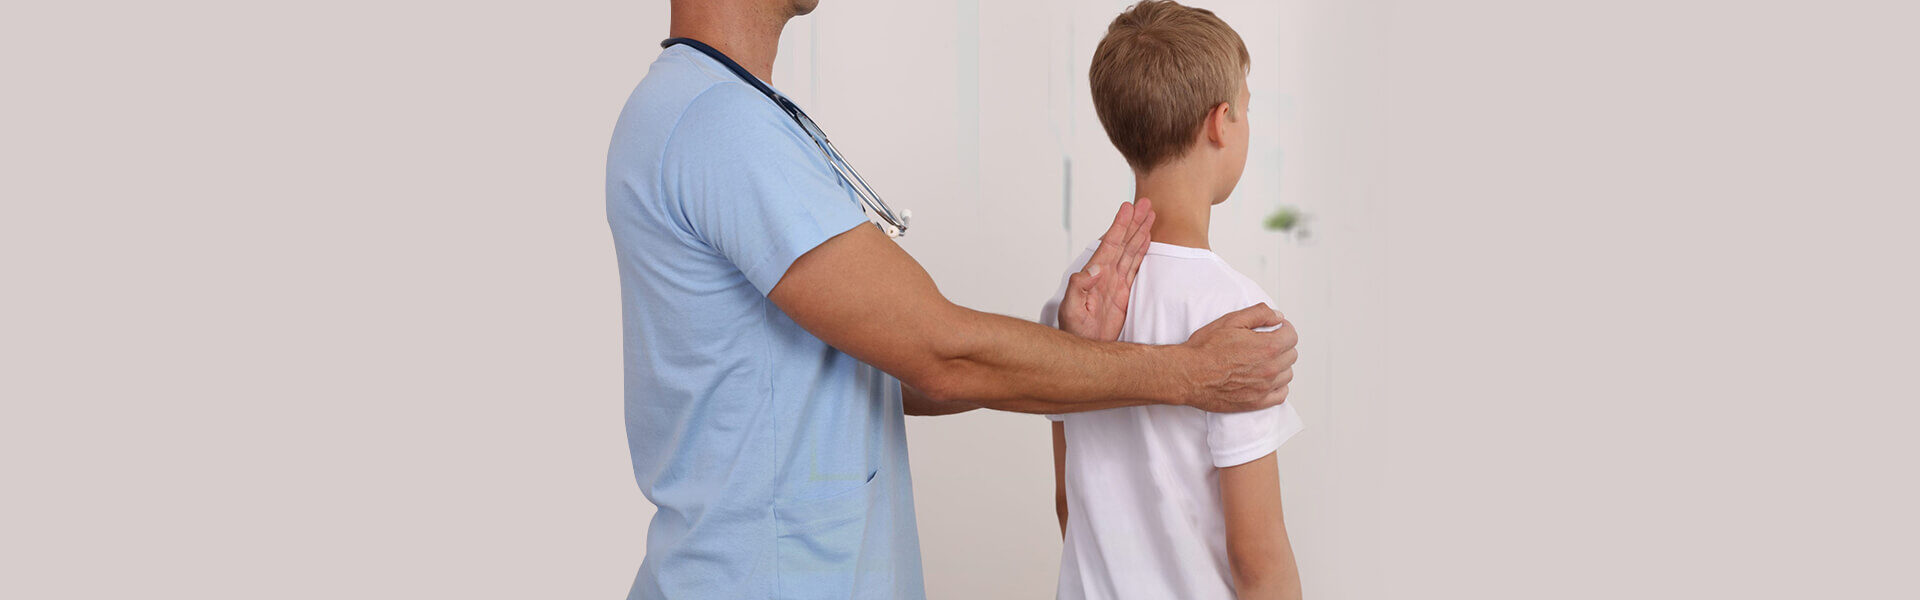 Chiropractic Care for Kids in Cave Creek, AZ